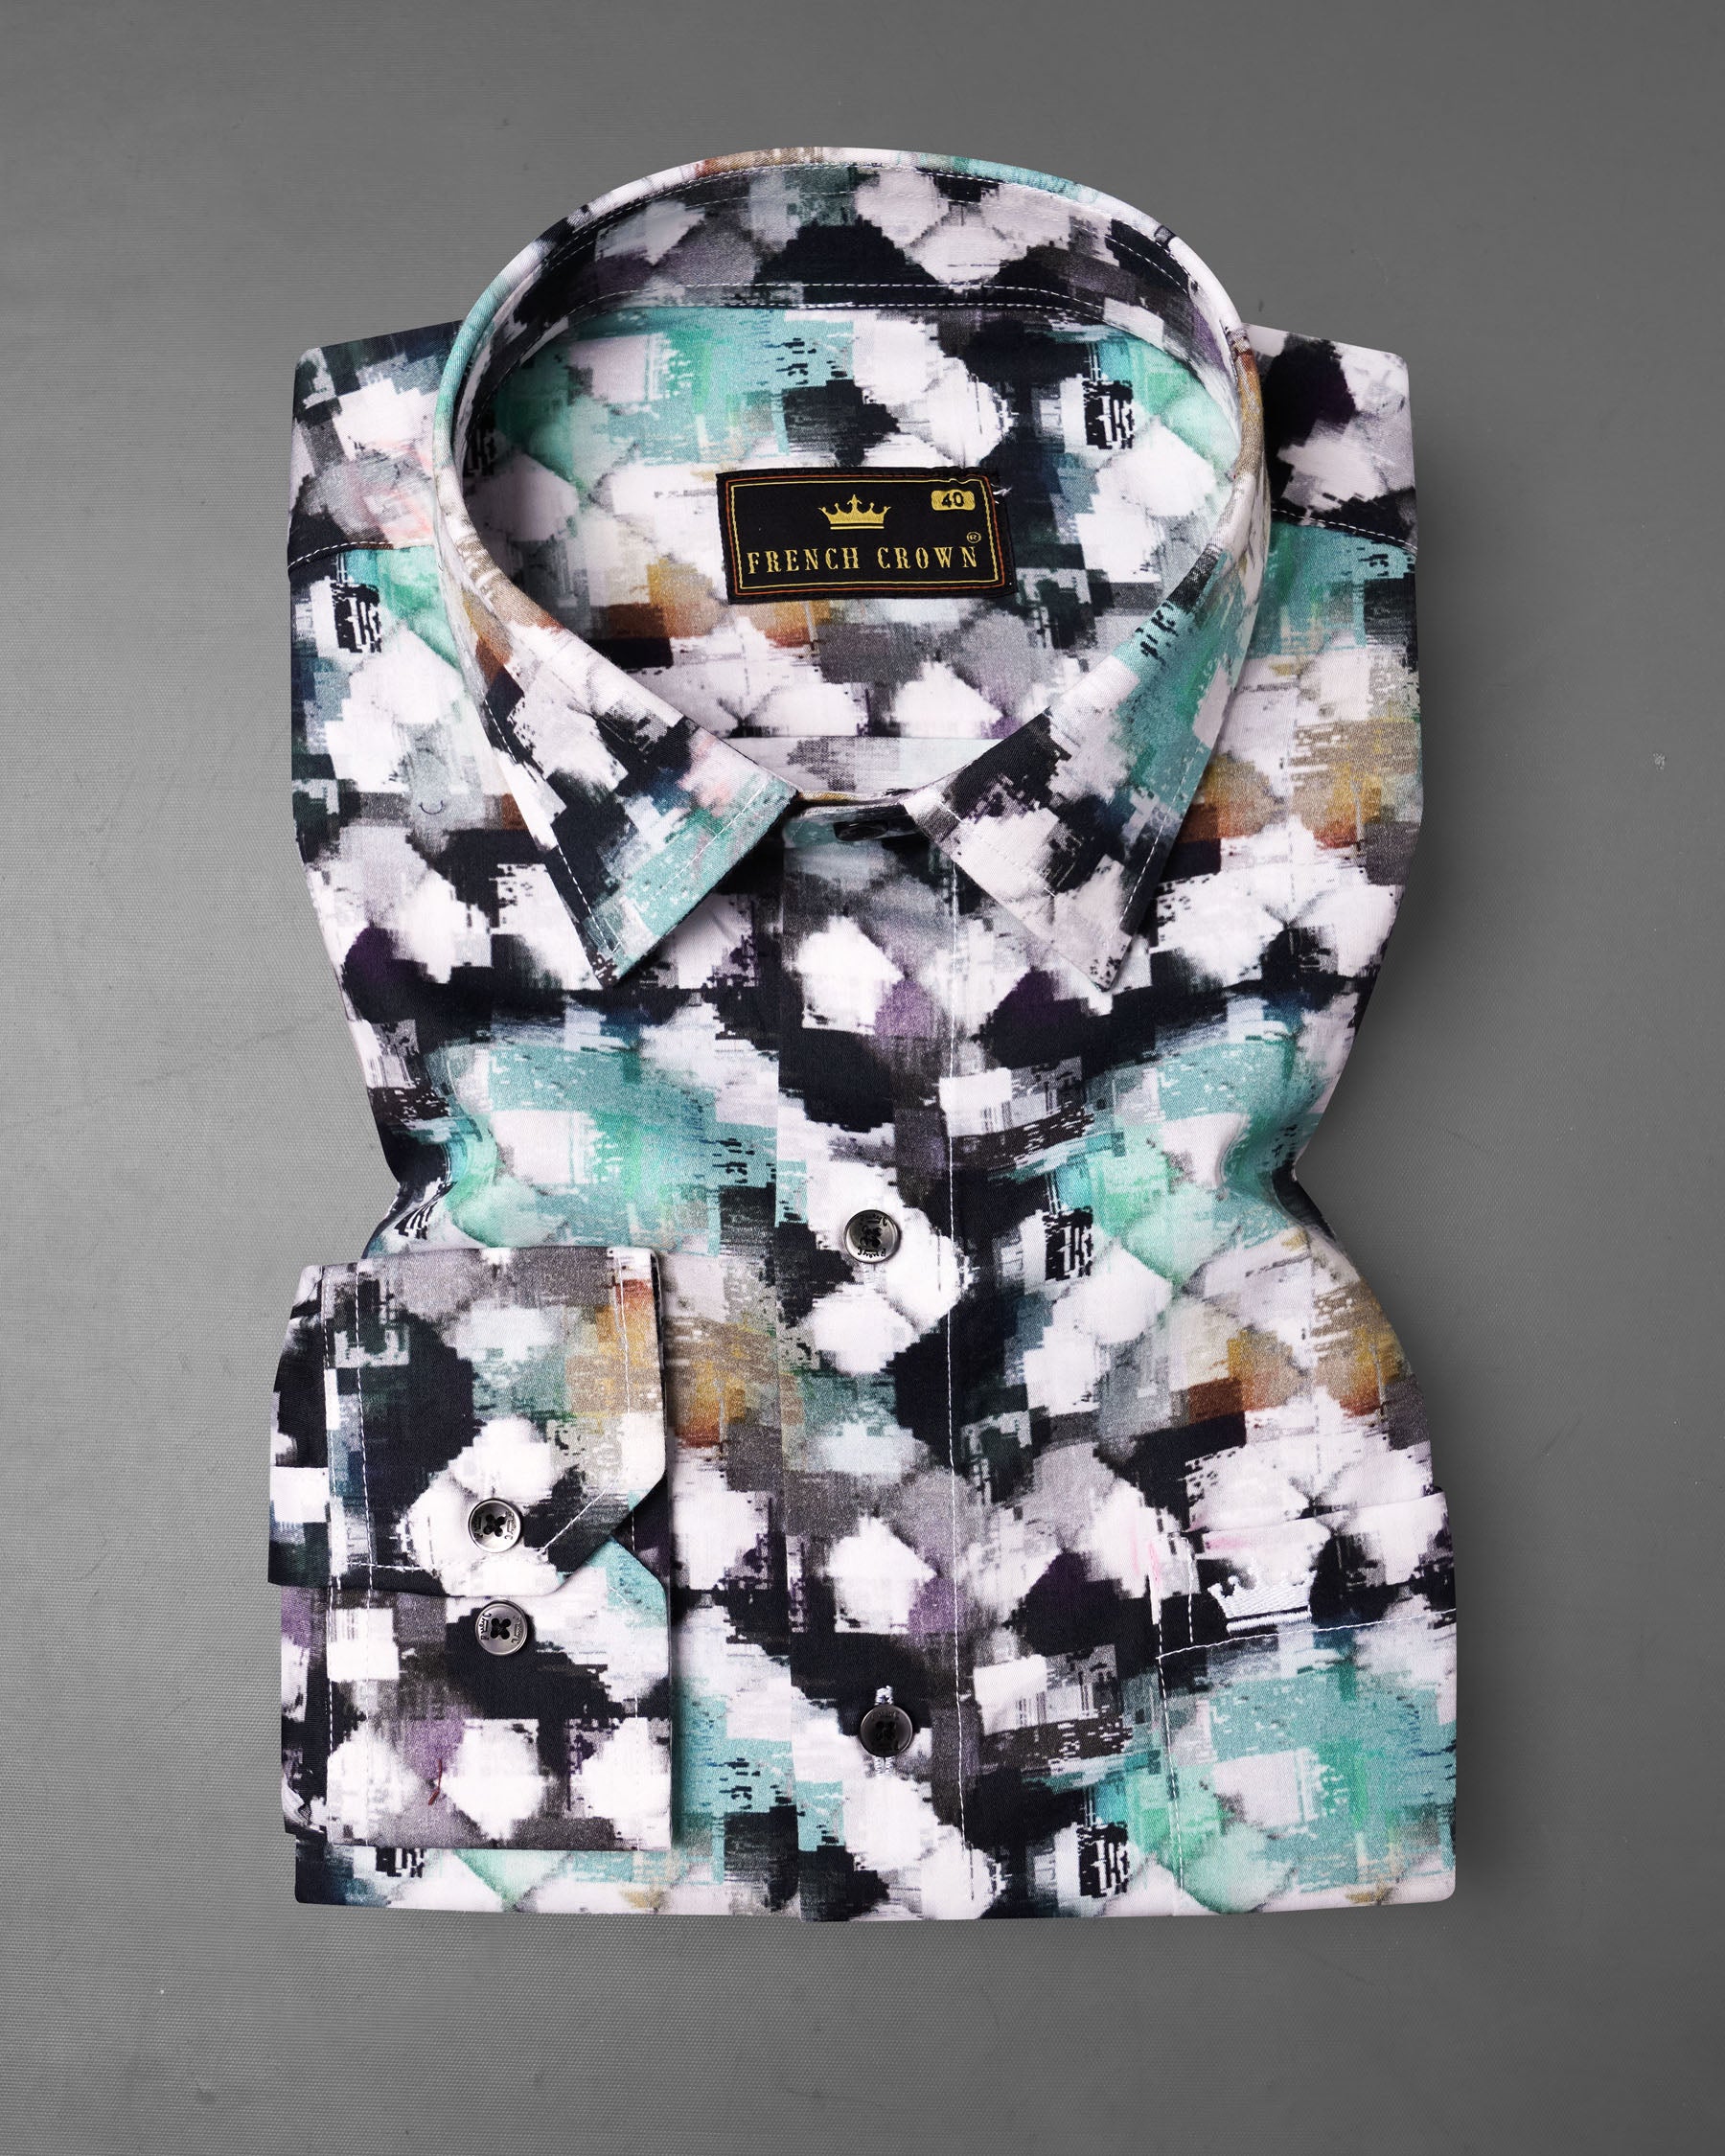 Bright White and Mulled Wine Marble Printed Super Soft Premium Cotton Shirt 7823-BLK-38, 7823-BLK-H-38, 7823-BLK-39,7823-BLK-H-39, 7823-BLK-40, 7823-BLK-H-40, 7823-BLK-42, 7823-BLK-H-42, 7823-BLK-44, 7823-BLK-H-44, 7823-BLK-46, 7823-BLK-H-46, 7823-BLK-48, 7823-BLK-H-48, 7823-BLK-50, 7823-BLK-H-50, 7823-BLK-52, 7823-BLK-H-52